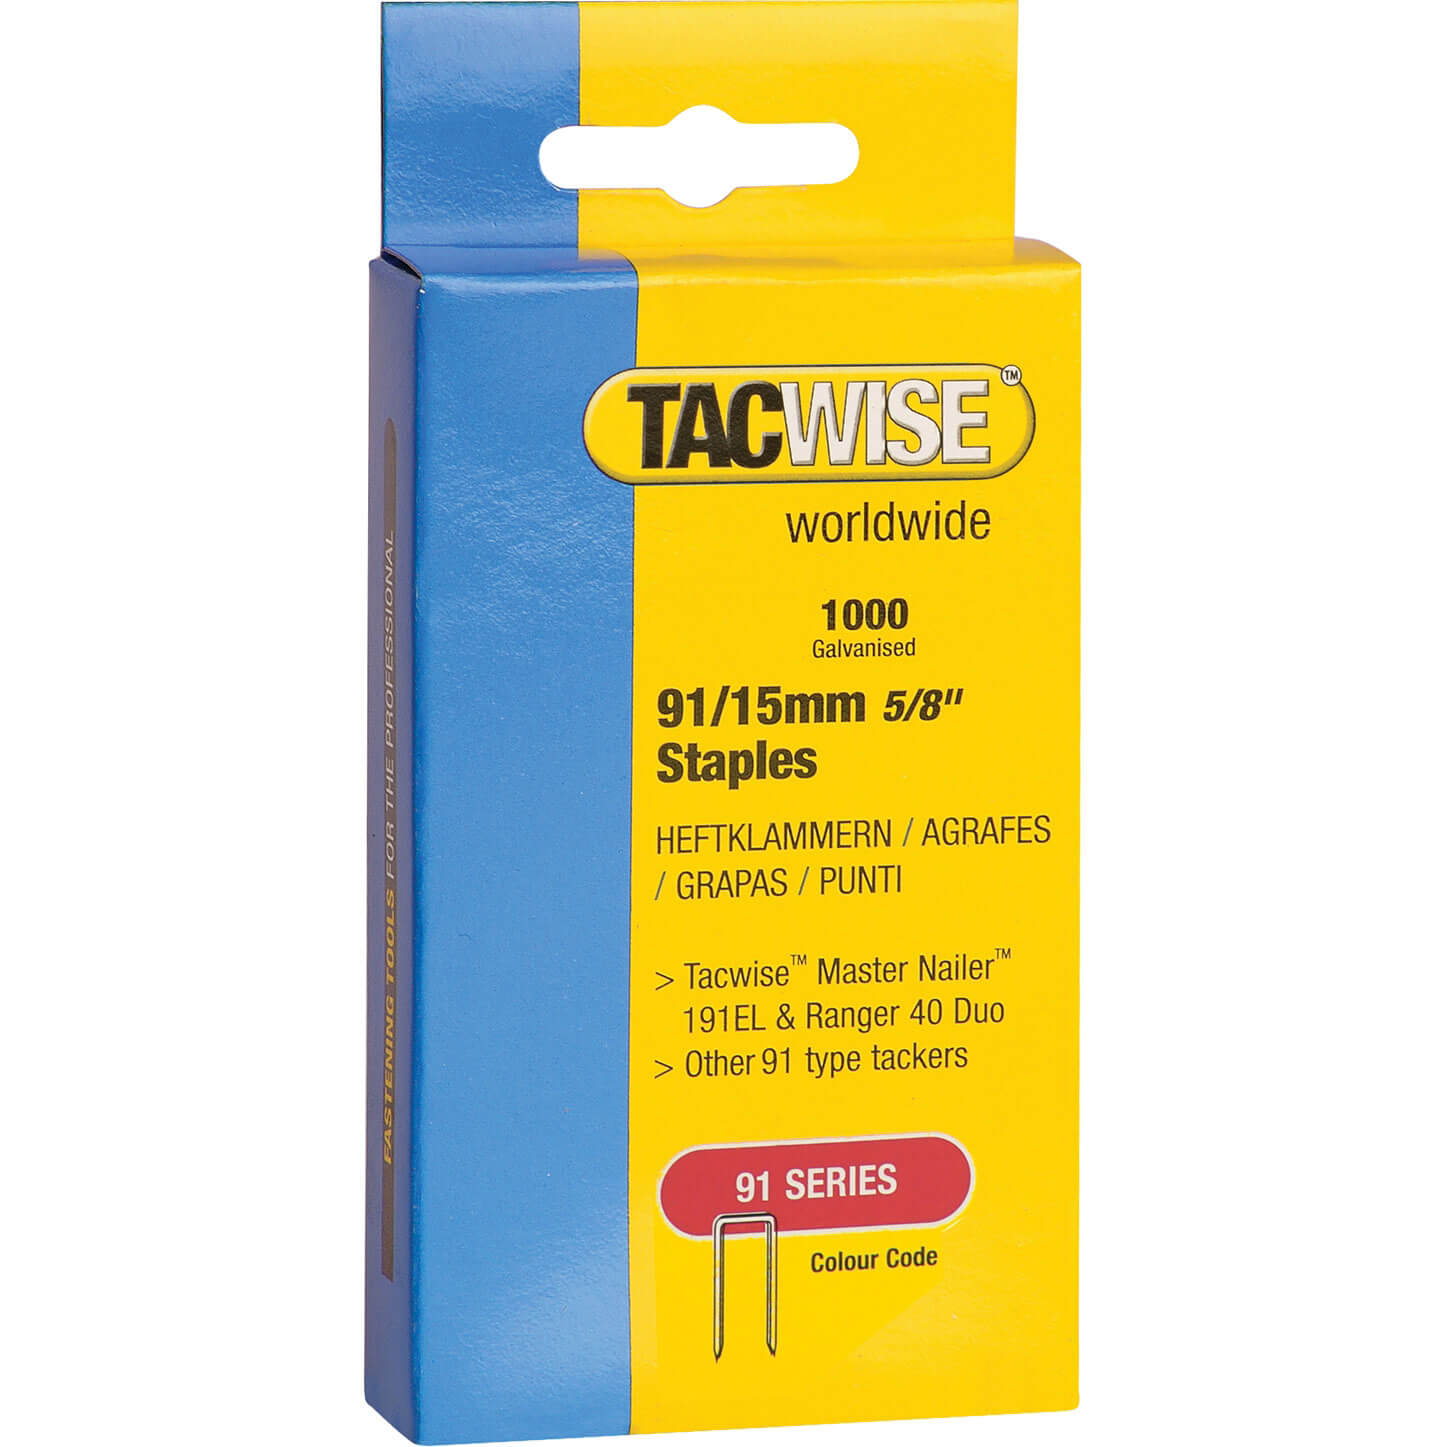 Tacwise 91/15mm Staples Pack of 1000